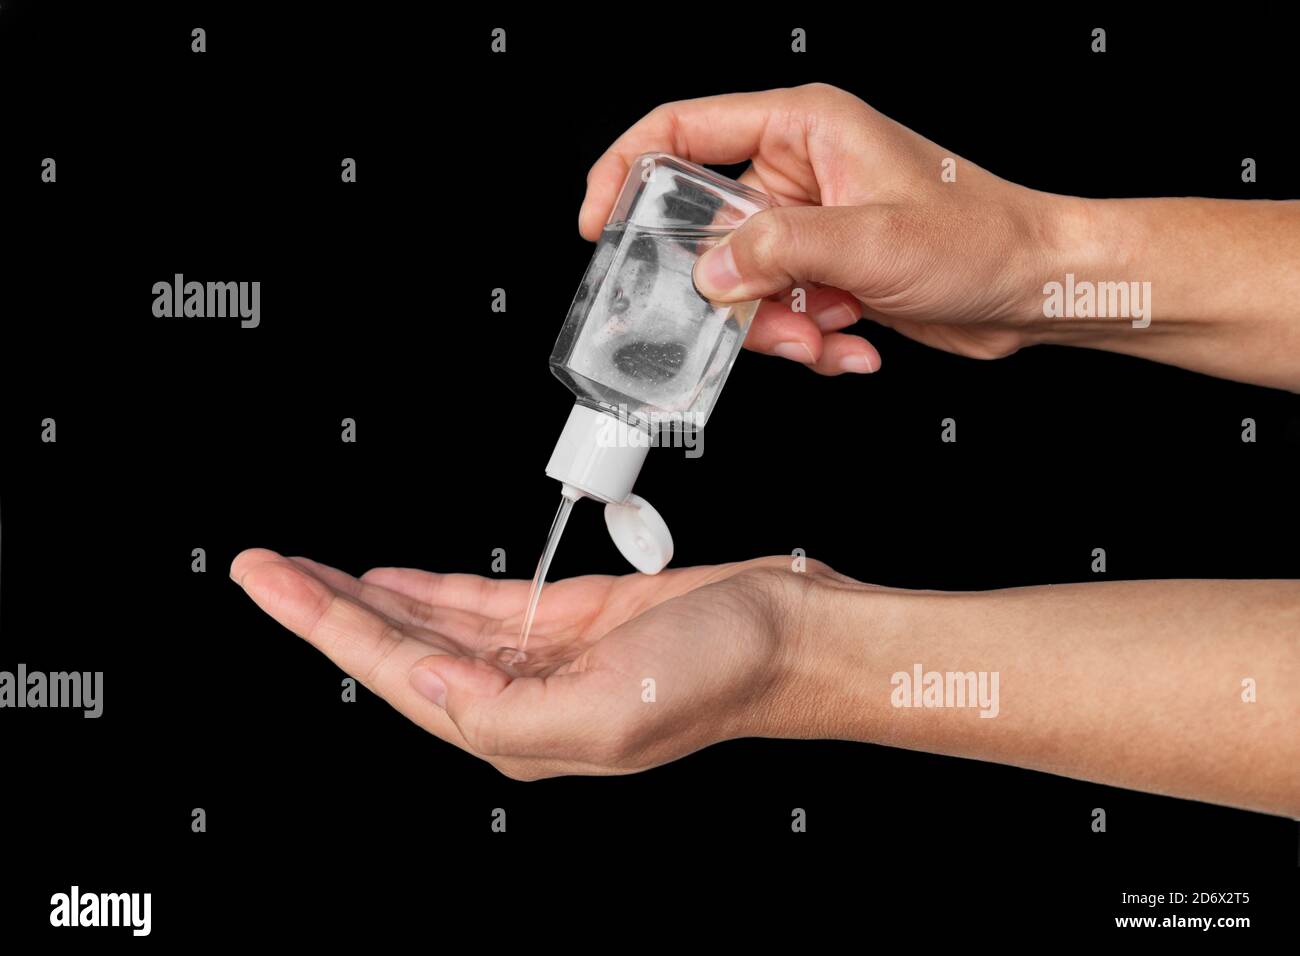 Portable small hand sanitizer bottle. Woman using to go dispenser for clean hands while commuting or shopping Stock Photo